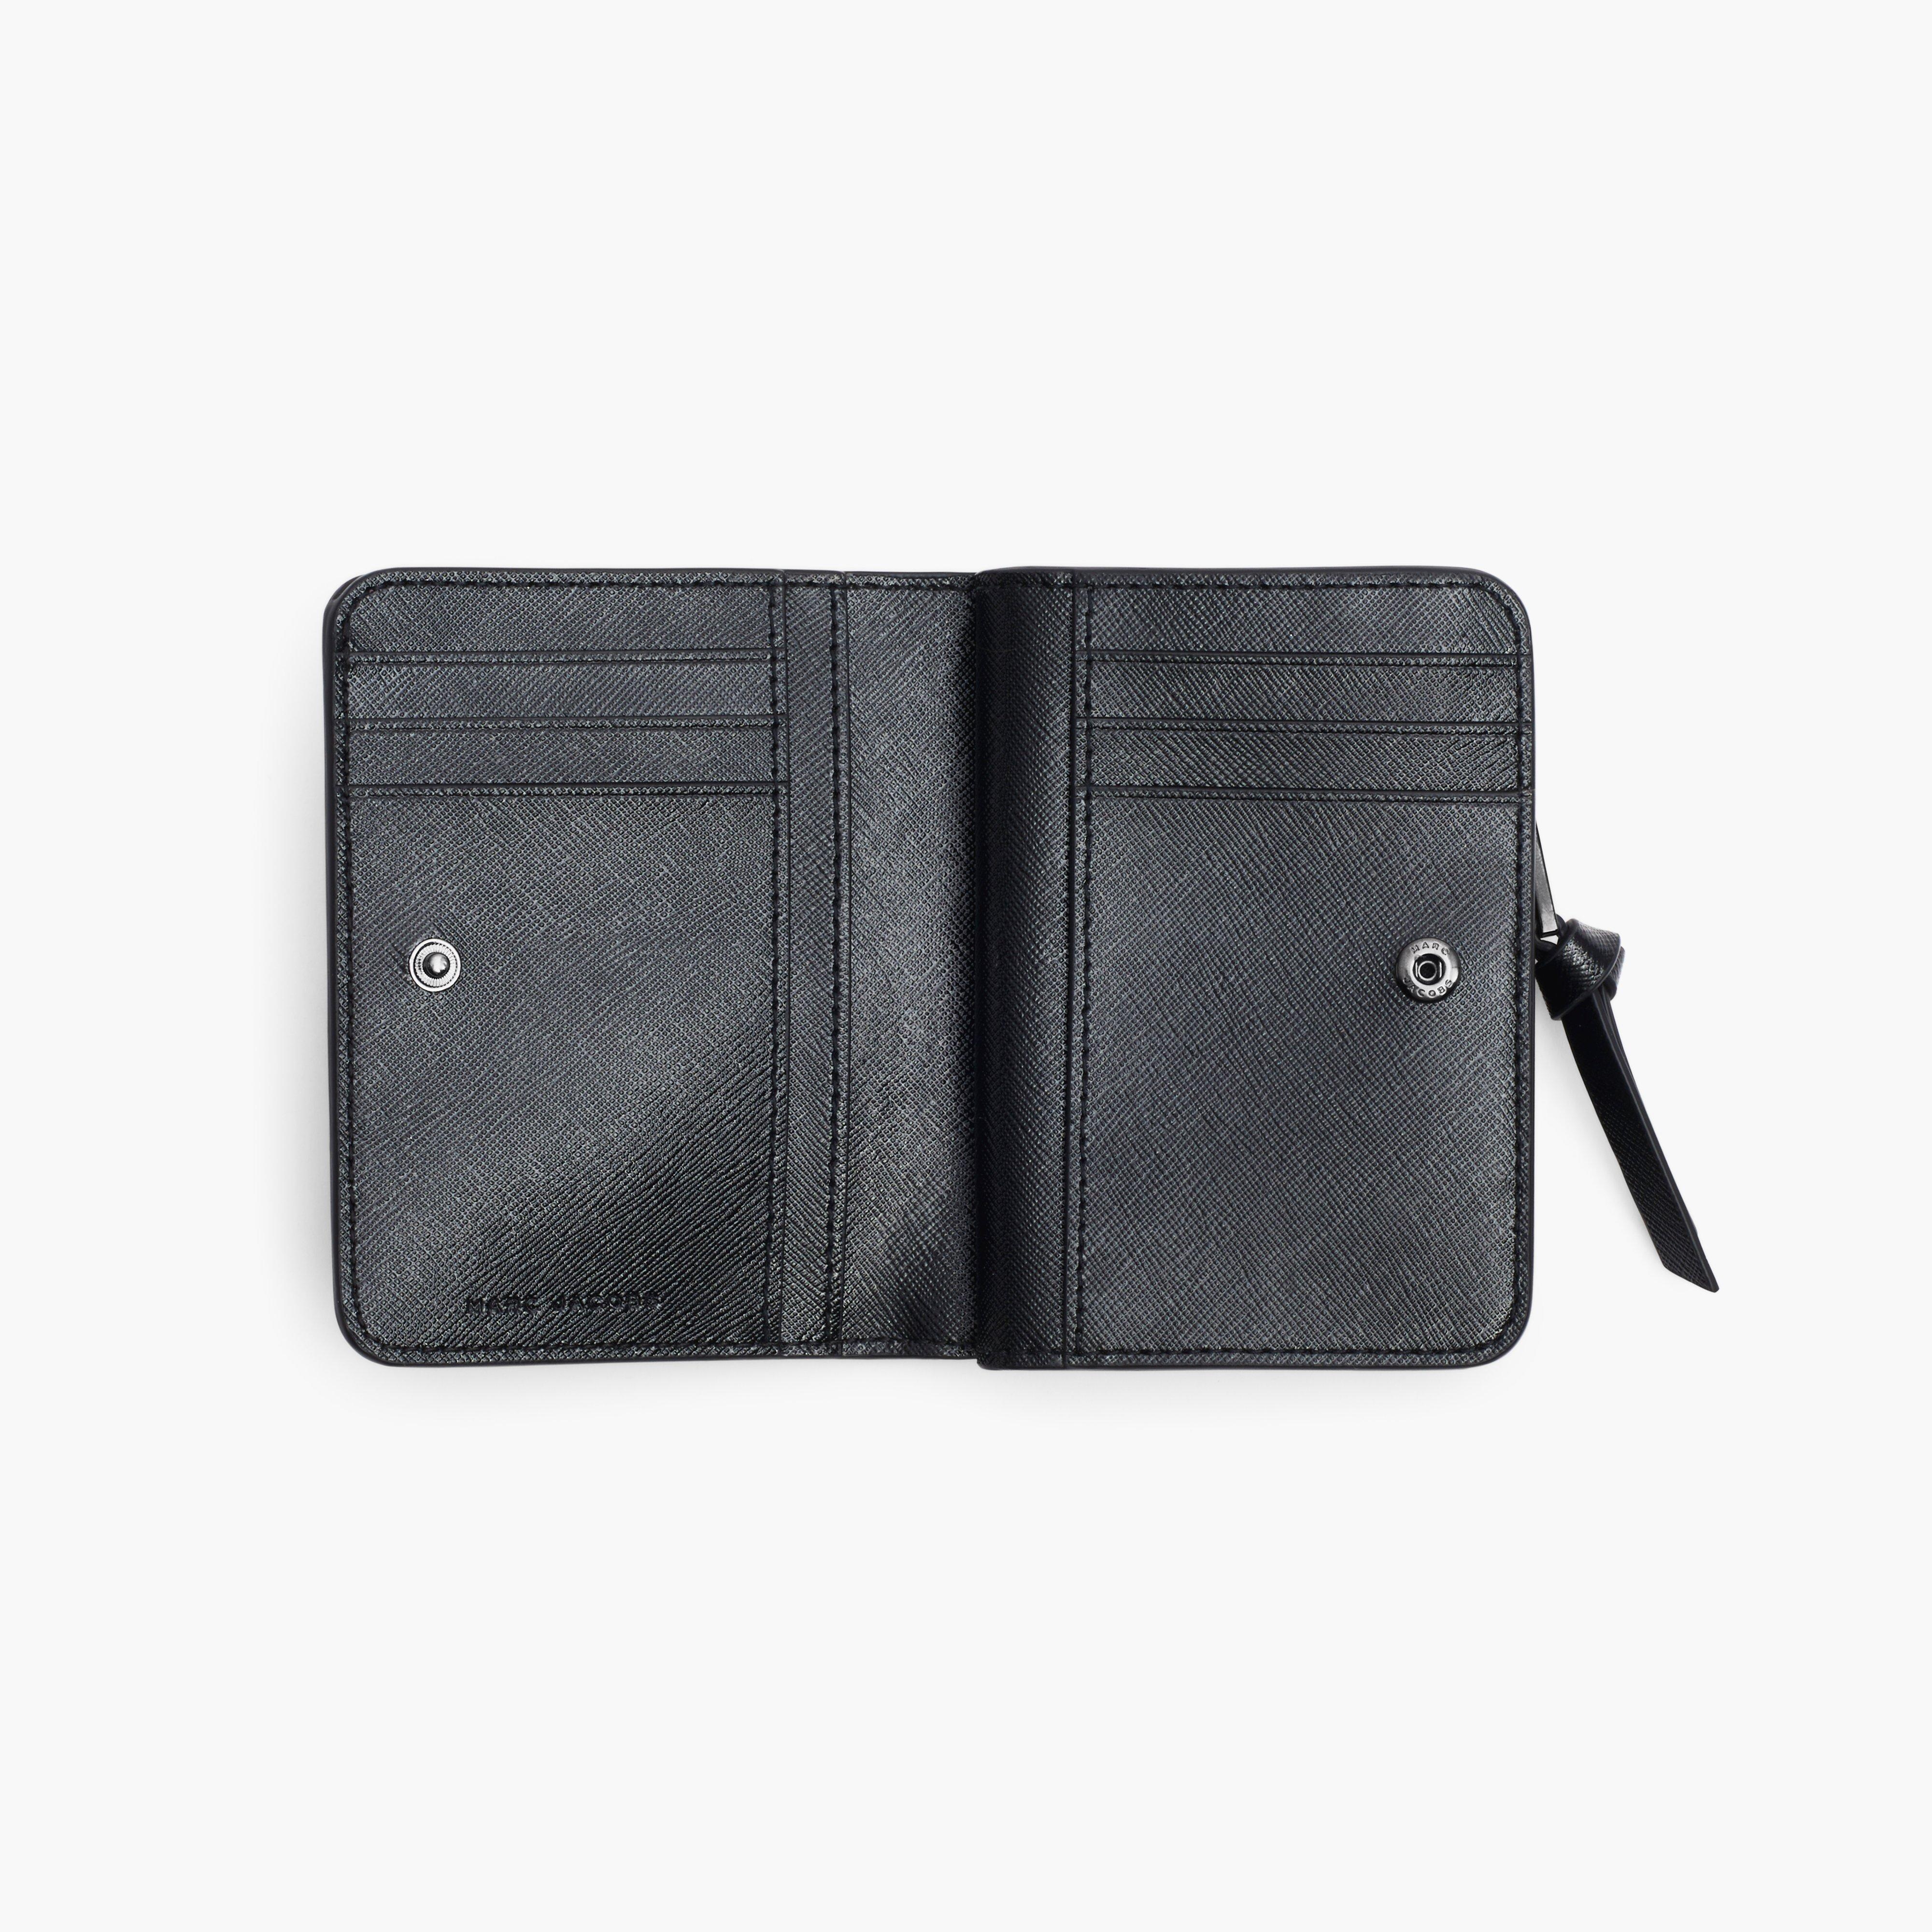 THE UTILITY SNAPSHOT DTM MINI COMPACT WALLET - 2